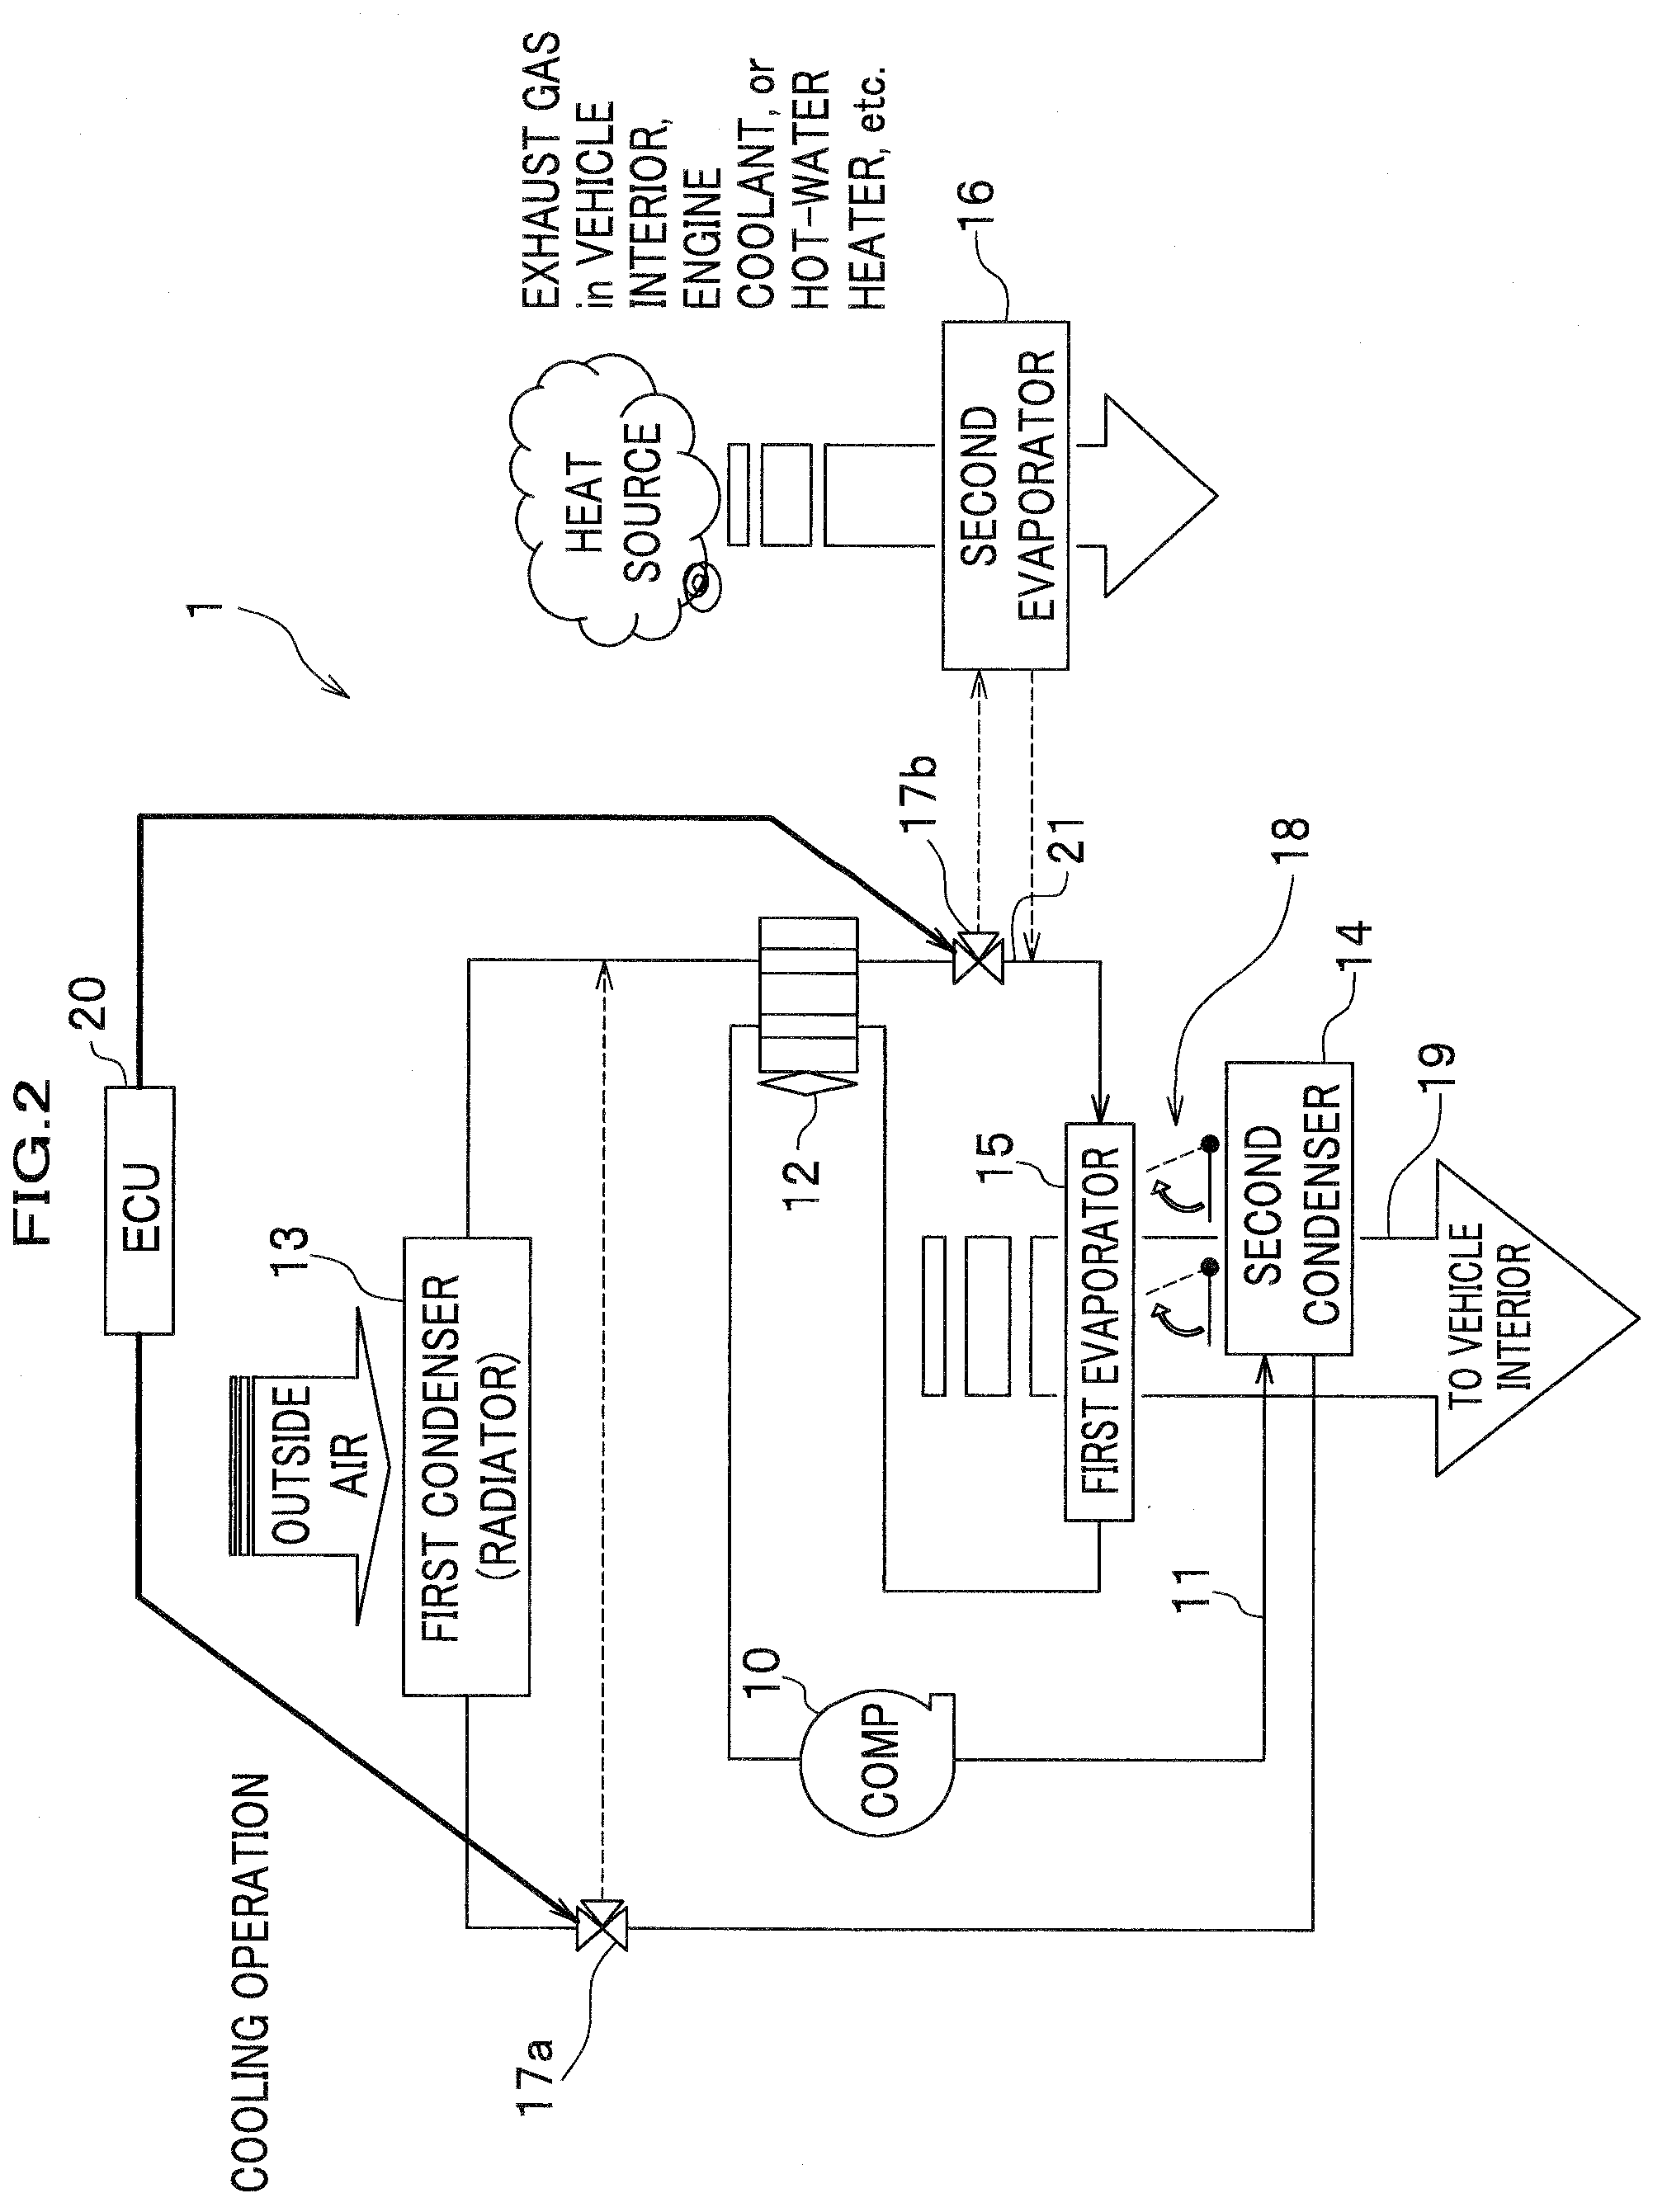 Vehicle air-conditioning system